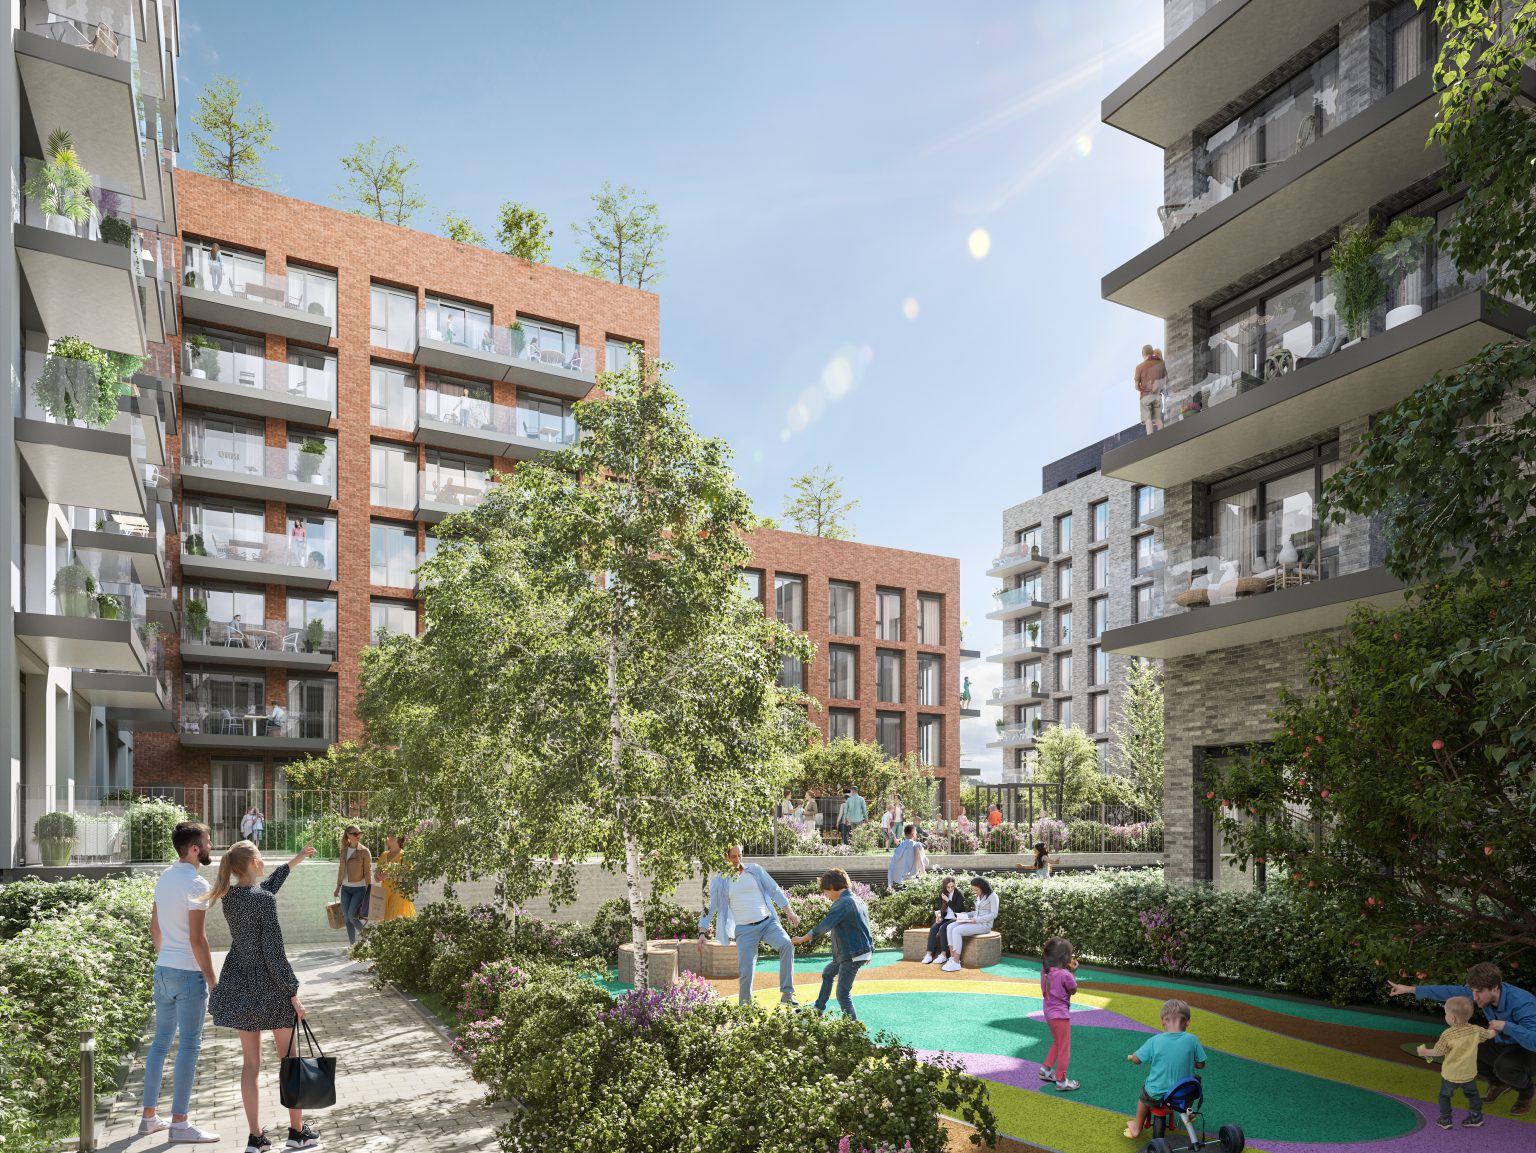 CGI Render of courtyard in development showing apartments and playground